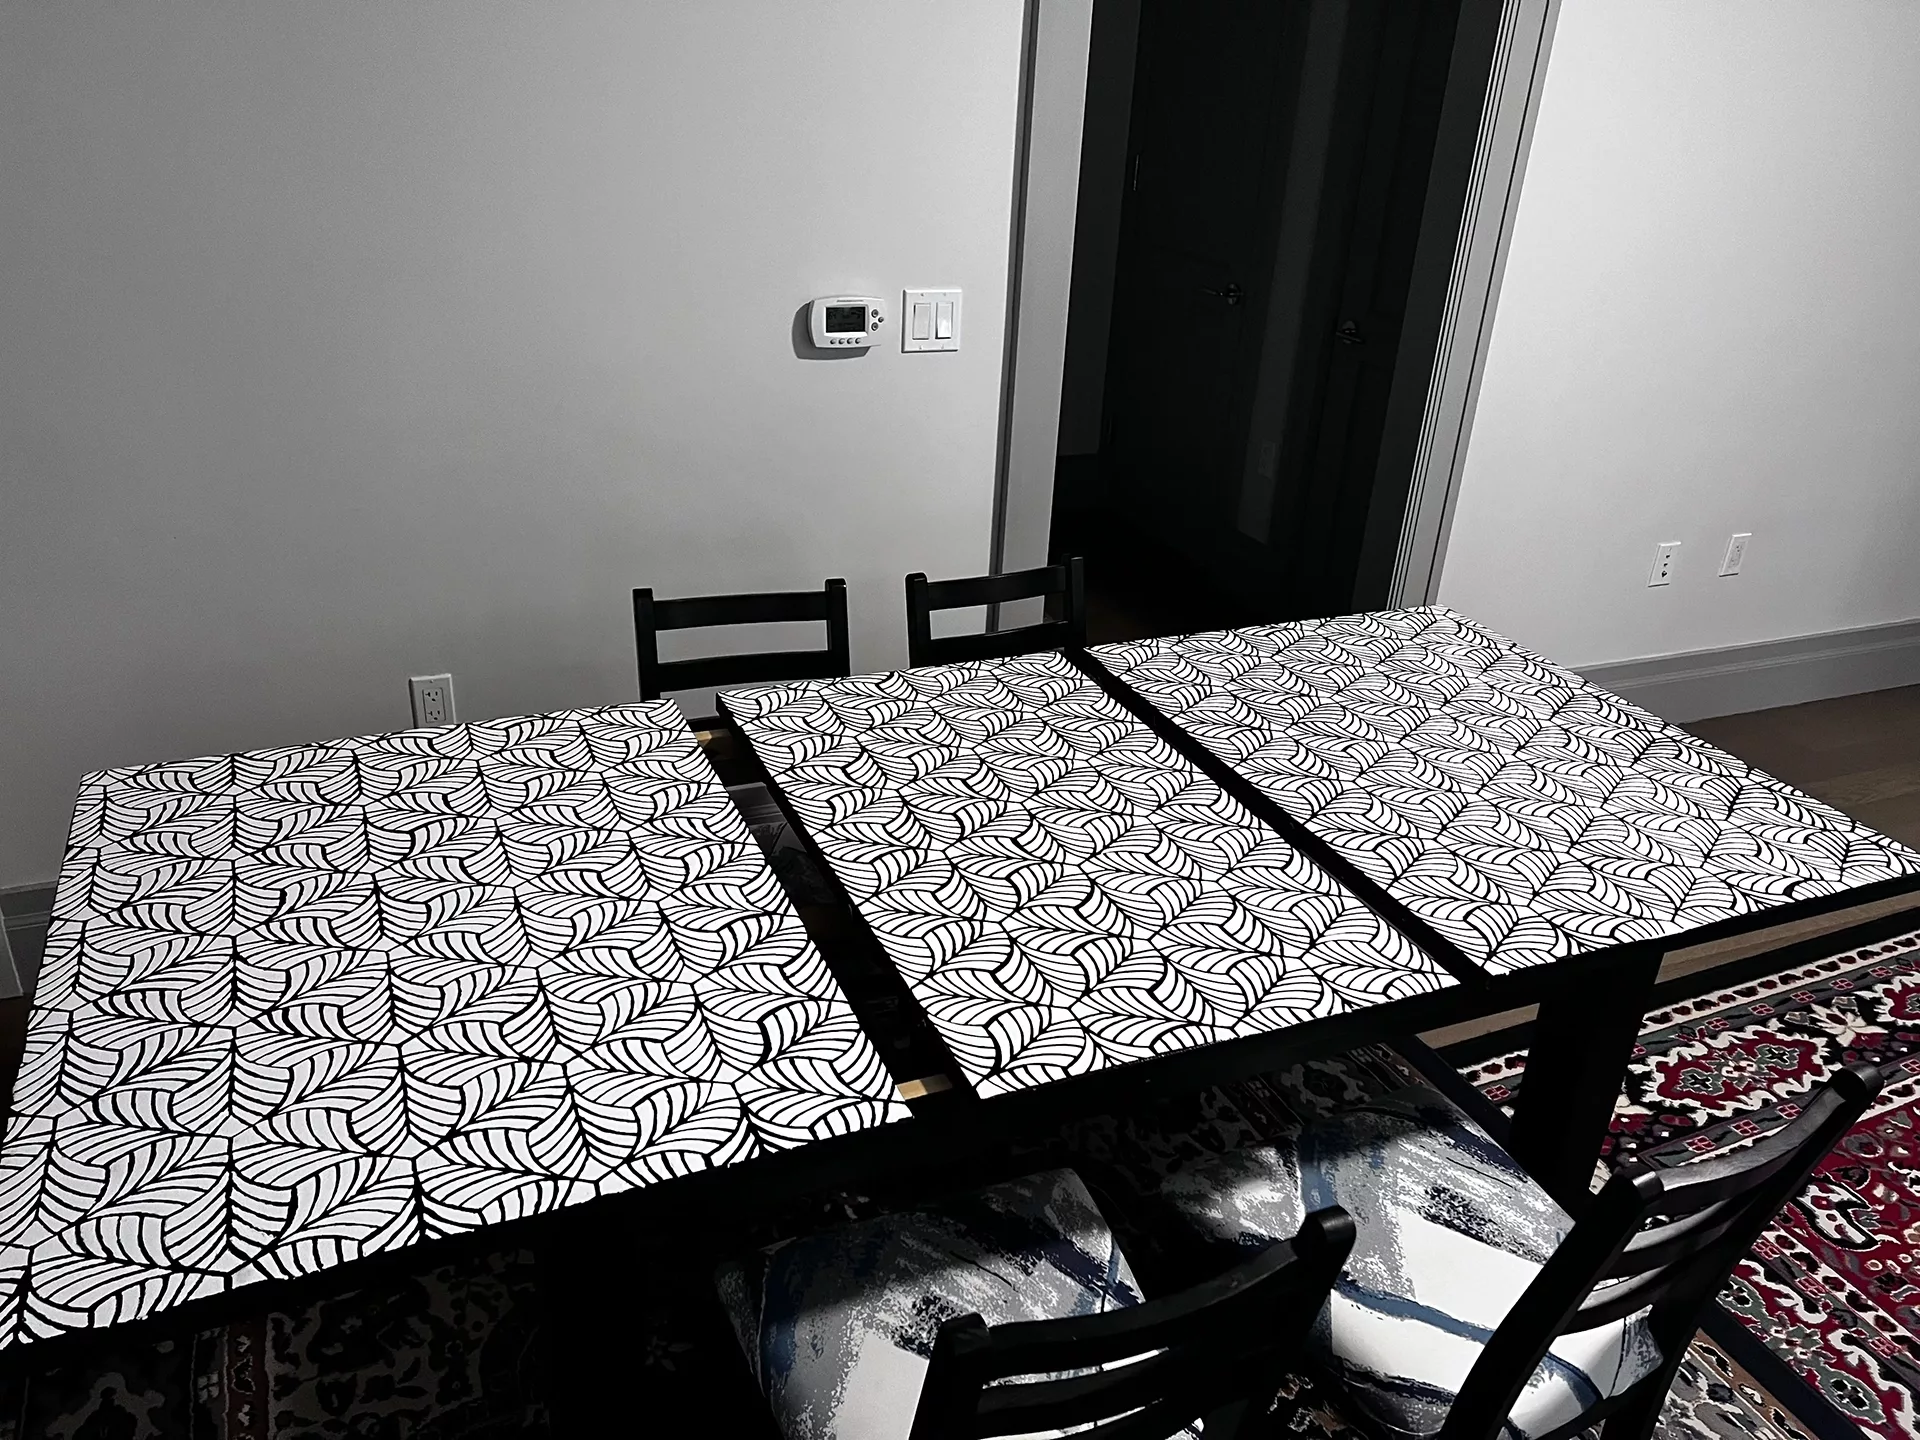 The table opened up to show the three pieces.